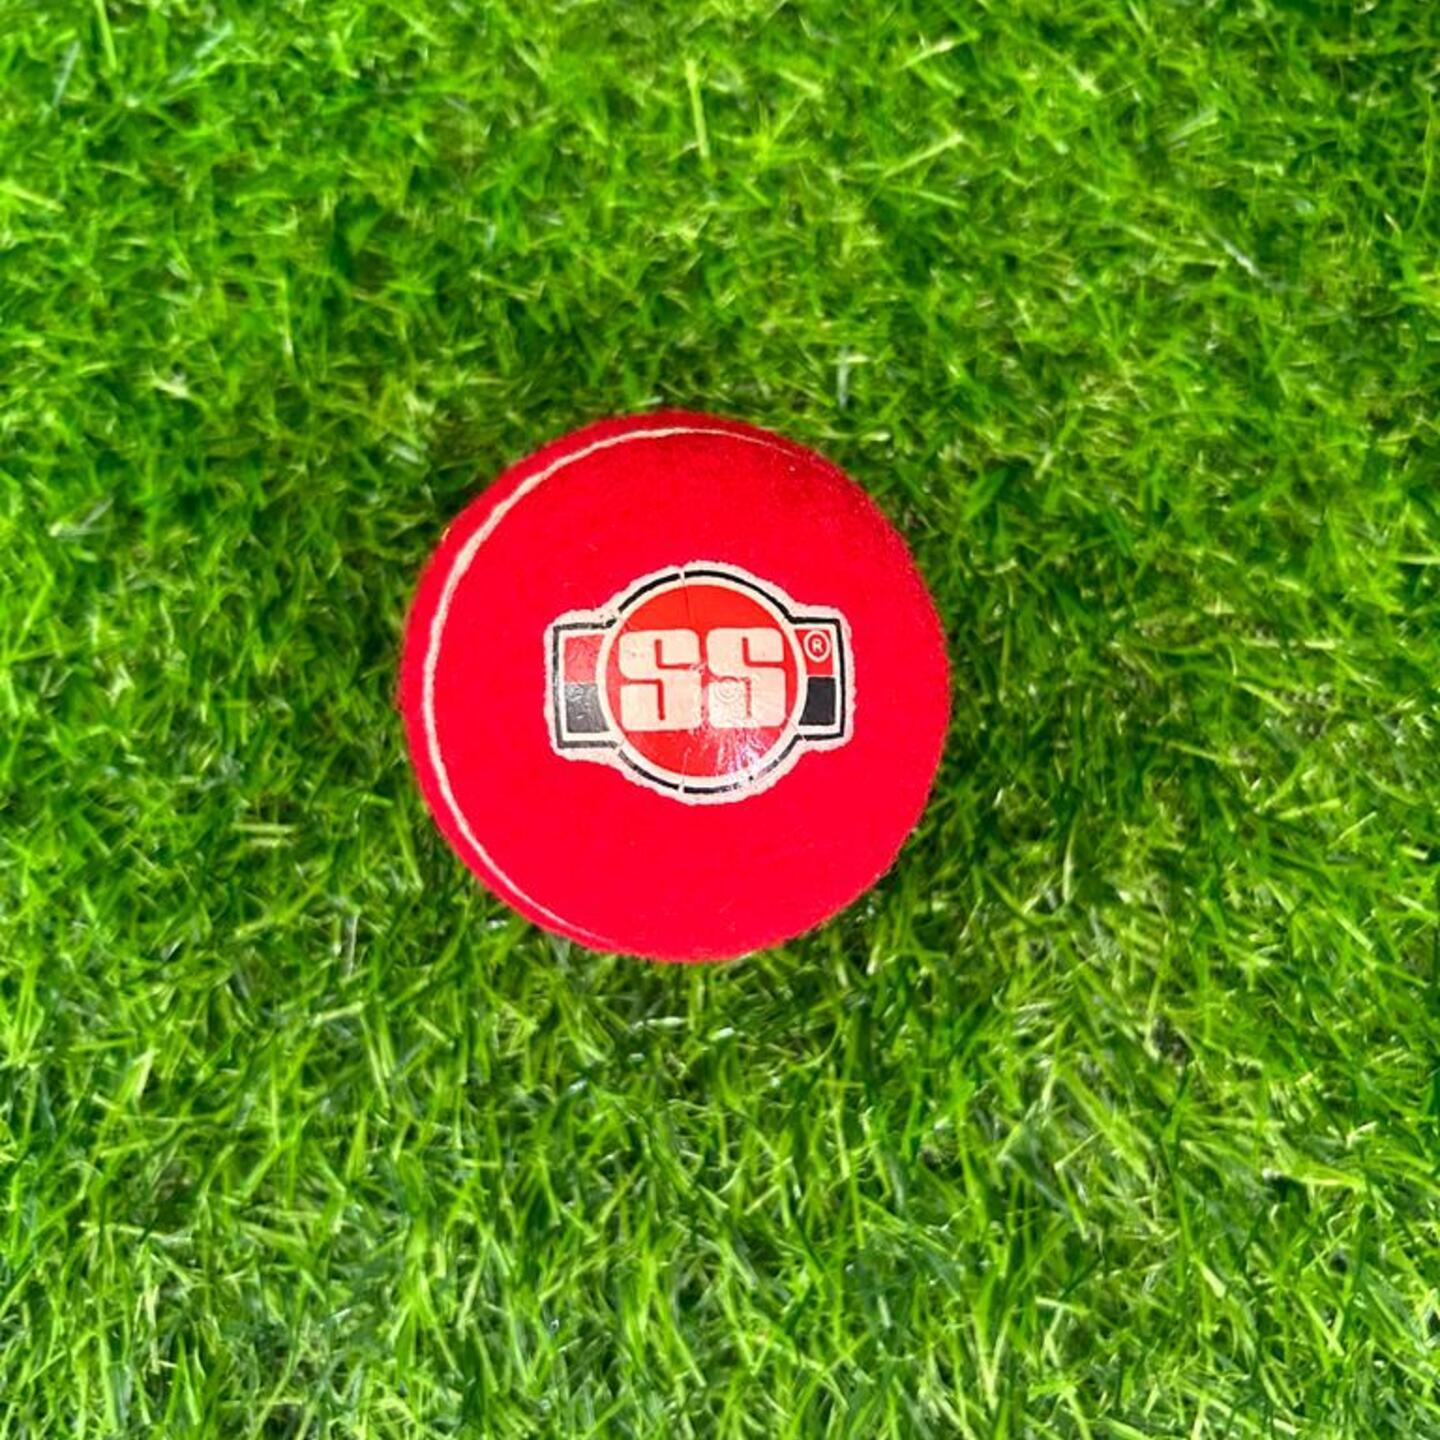 SS TENNIS BALL WITH SEAM | CRICKET PRACTICE BALL